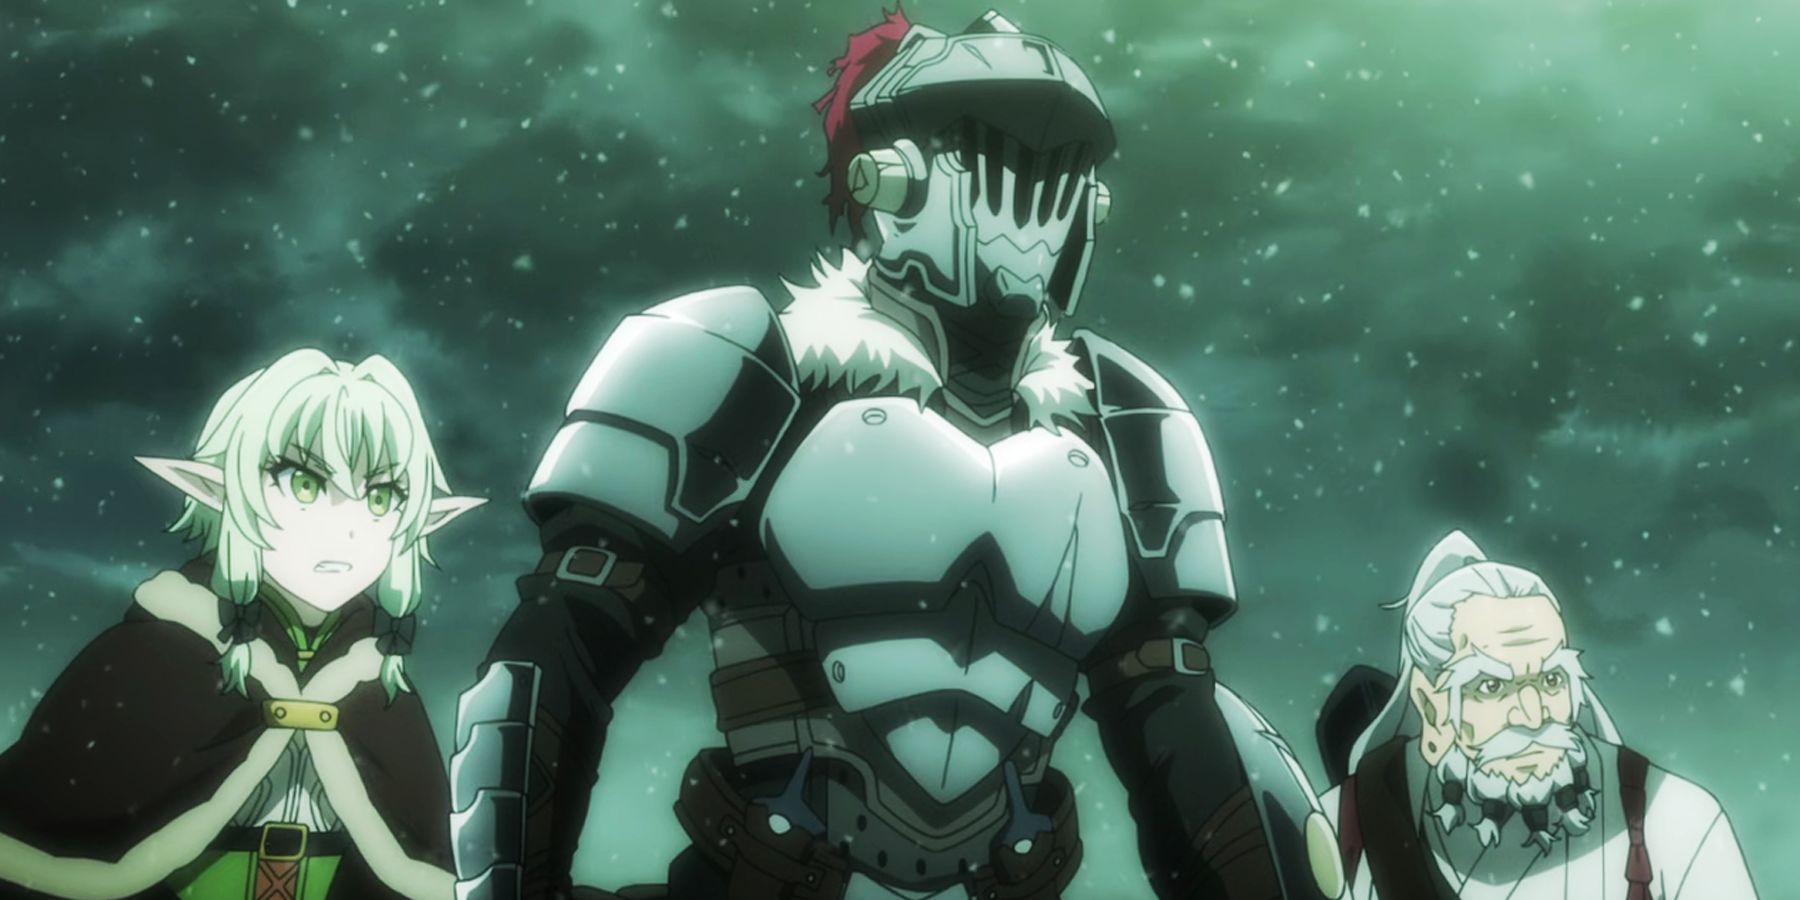 Goblin Slayer: What to Expect From Season 2 (According to the Manga)